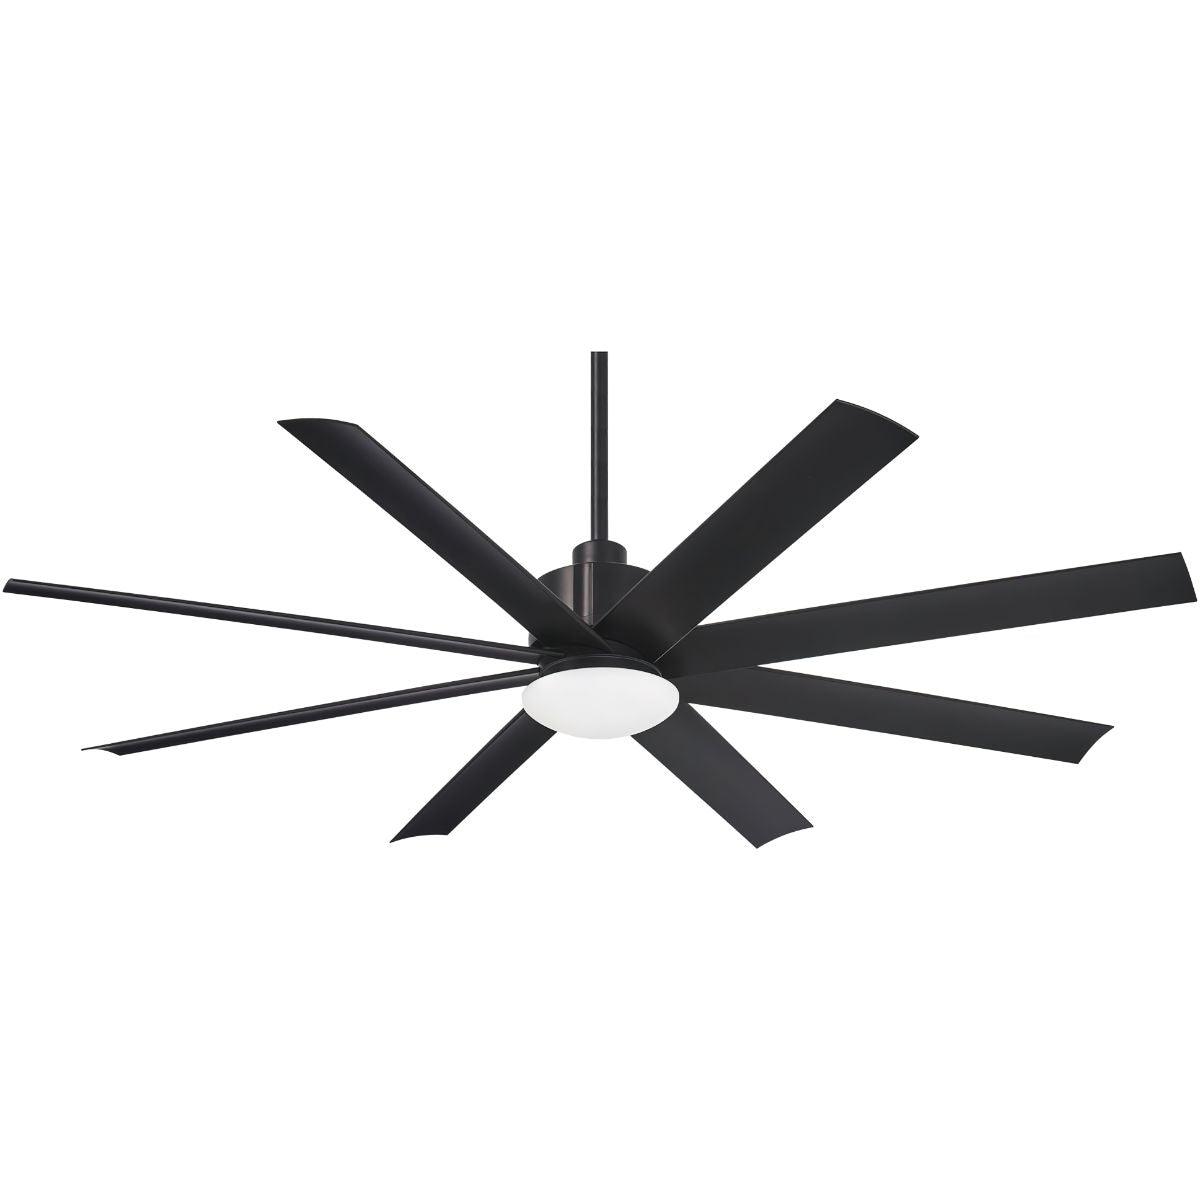 Slipstream 65 Inch Modern Windmill Outdoor Ceiling Fan With Light And Remote, Coal Finish - Bees Lighting